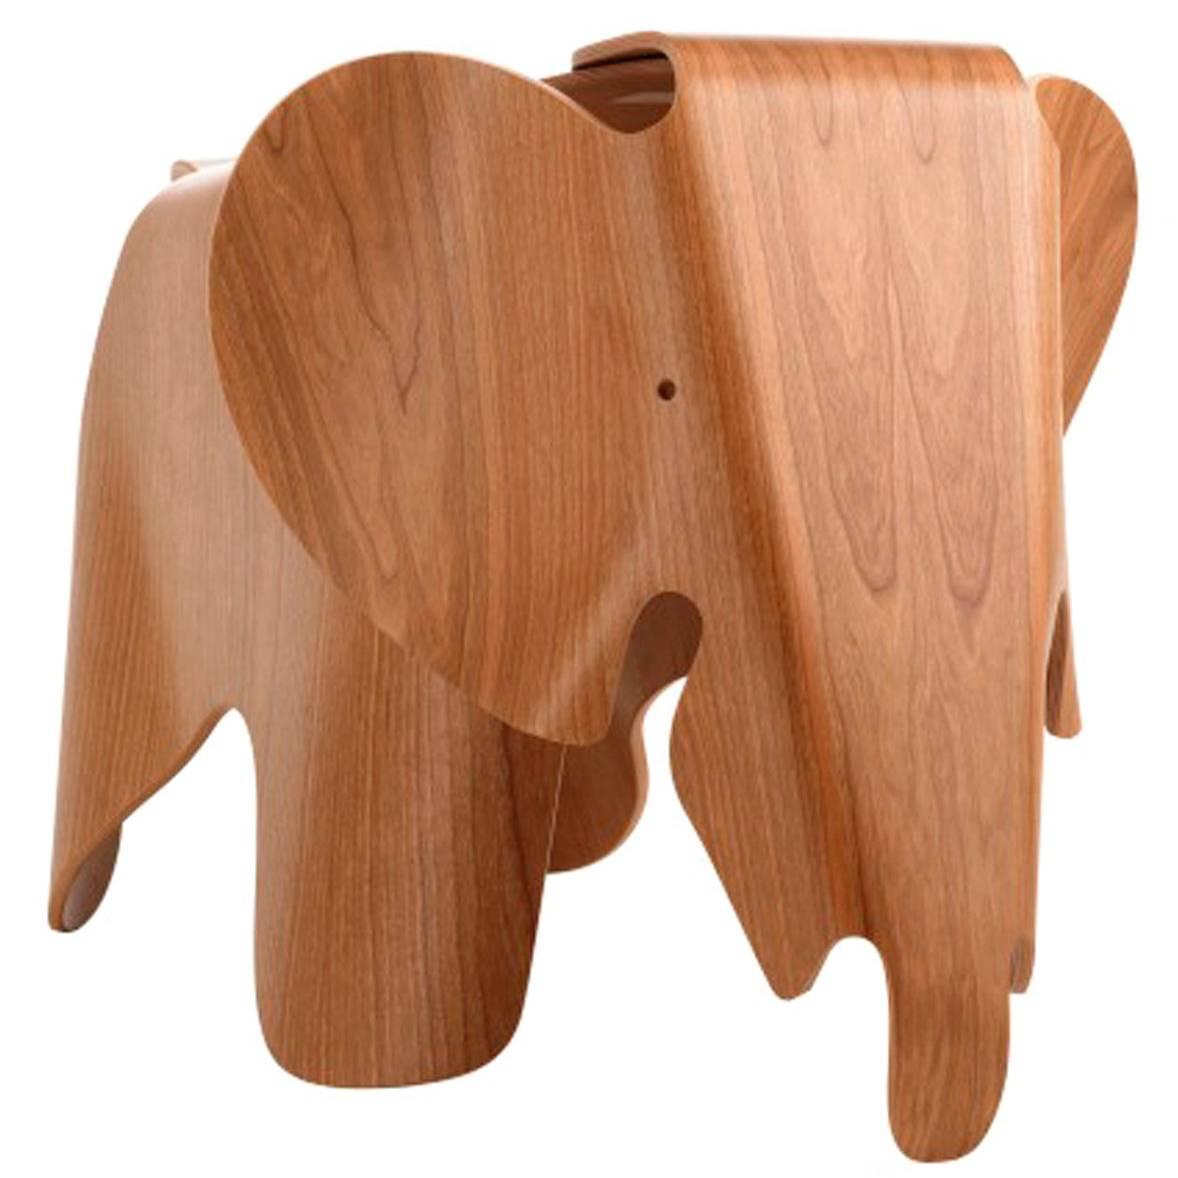 Ray and Charles Eames Plywood Elephant by Vitra